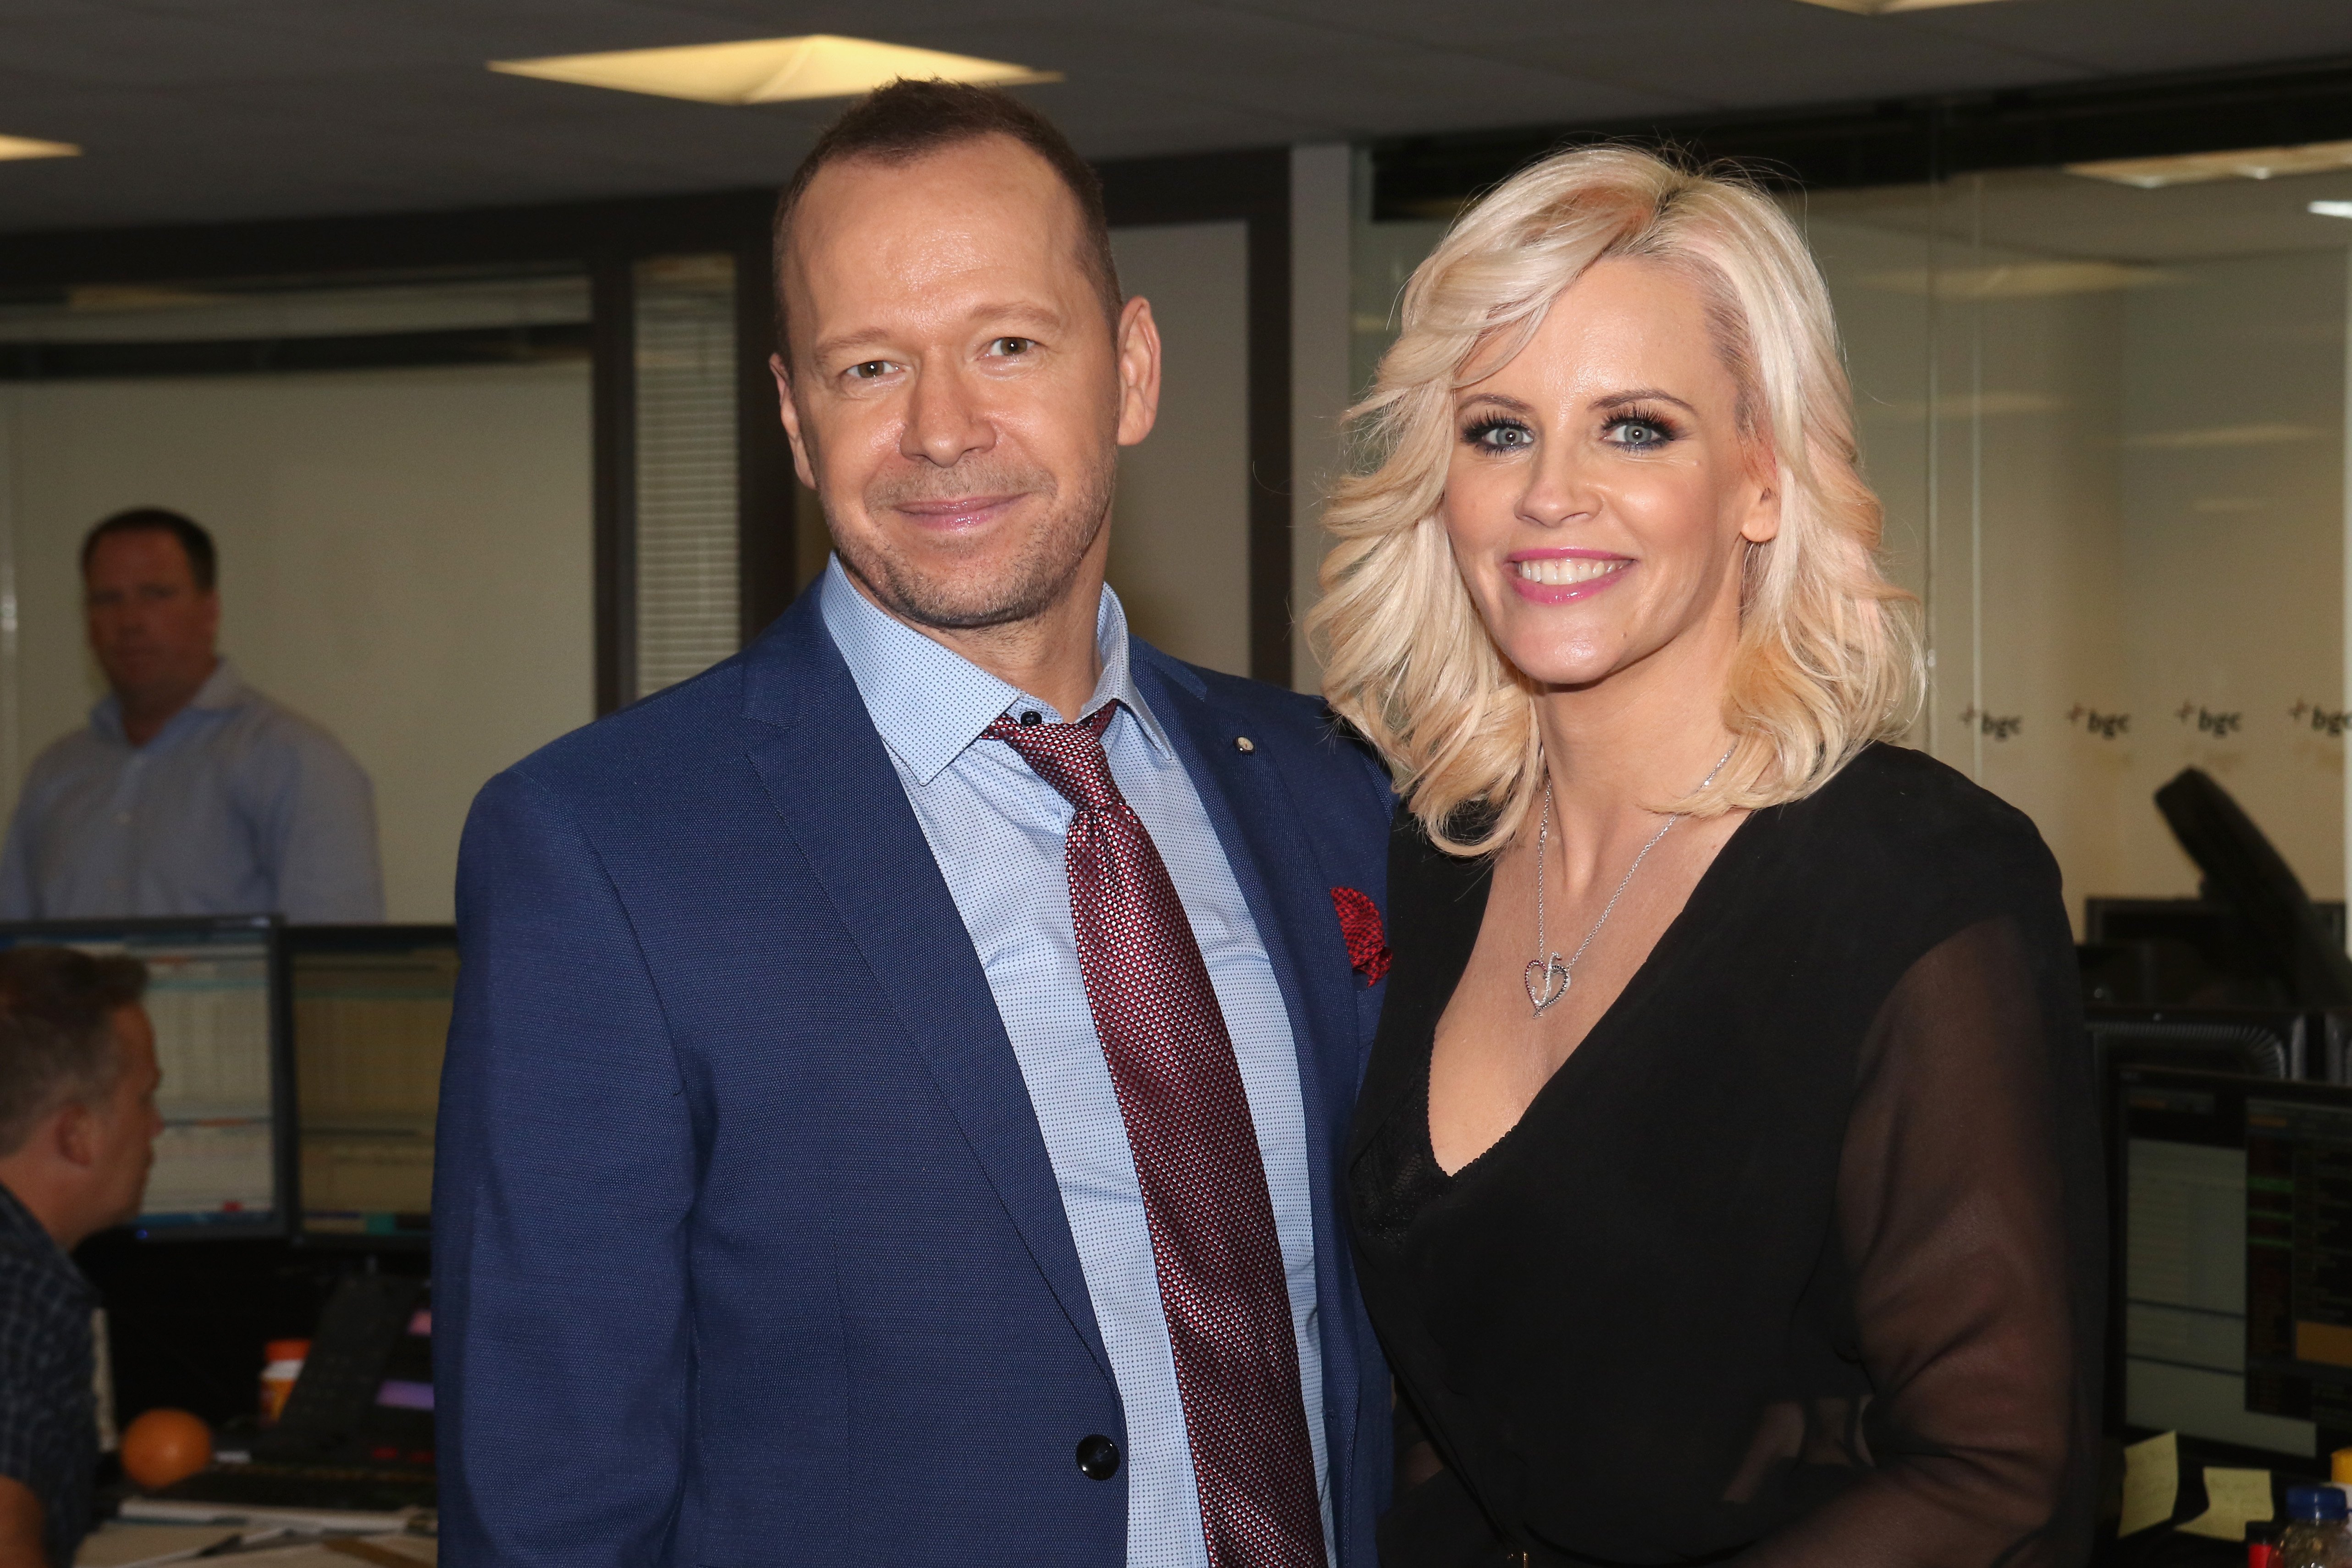 Donnie Wahlberg and Jenny McCarthy attend Annual Charity Day hosted by Cantor Fitzgerald and BGC at BGC Partners, INC on September 11, 2015, in New York City. | Source: Getty Images.